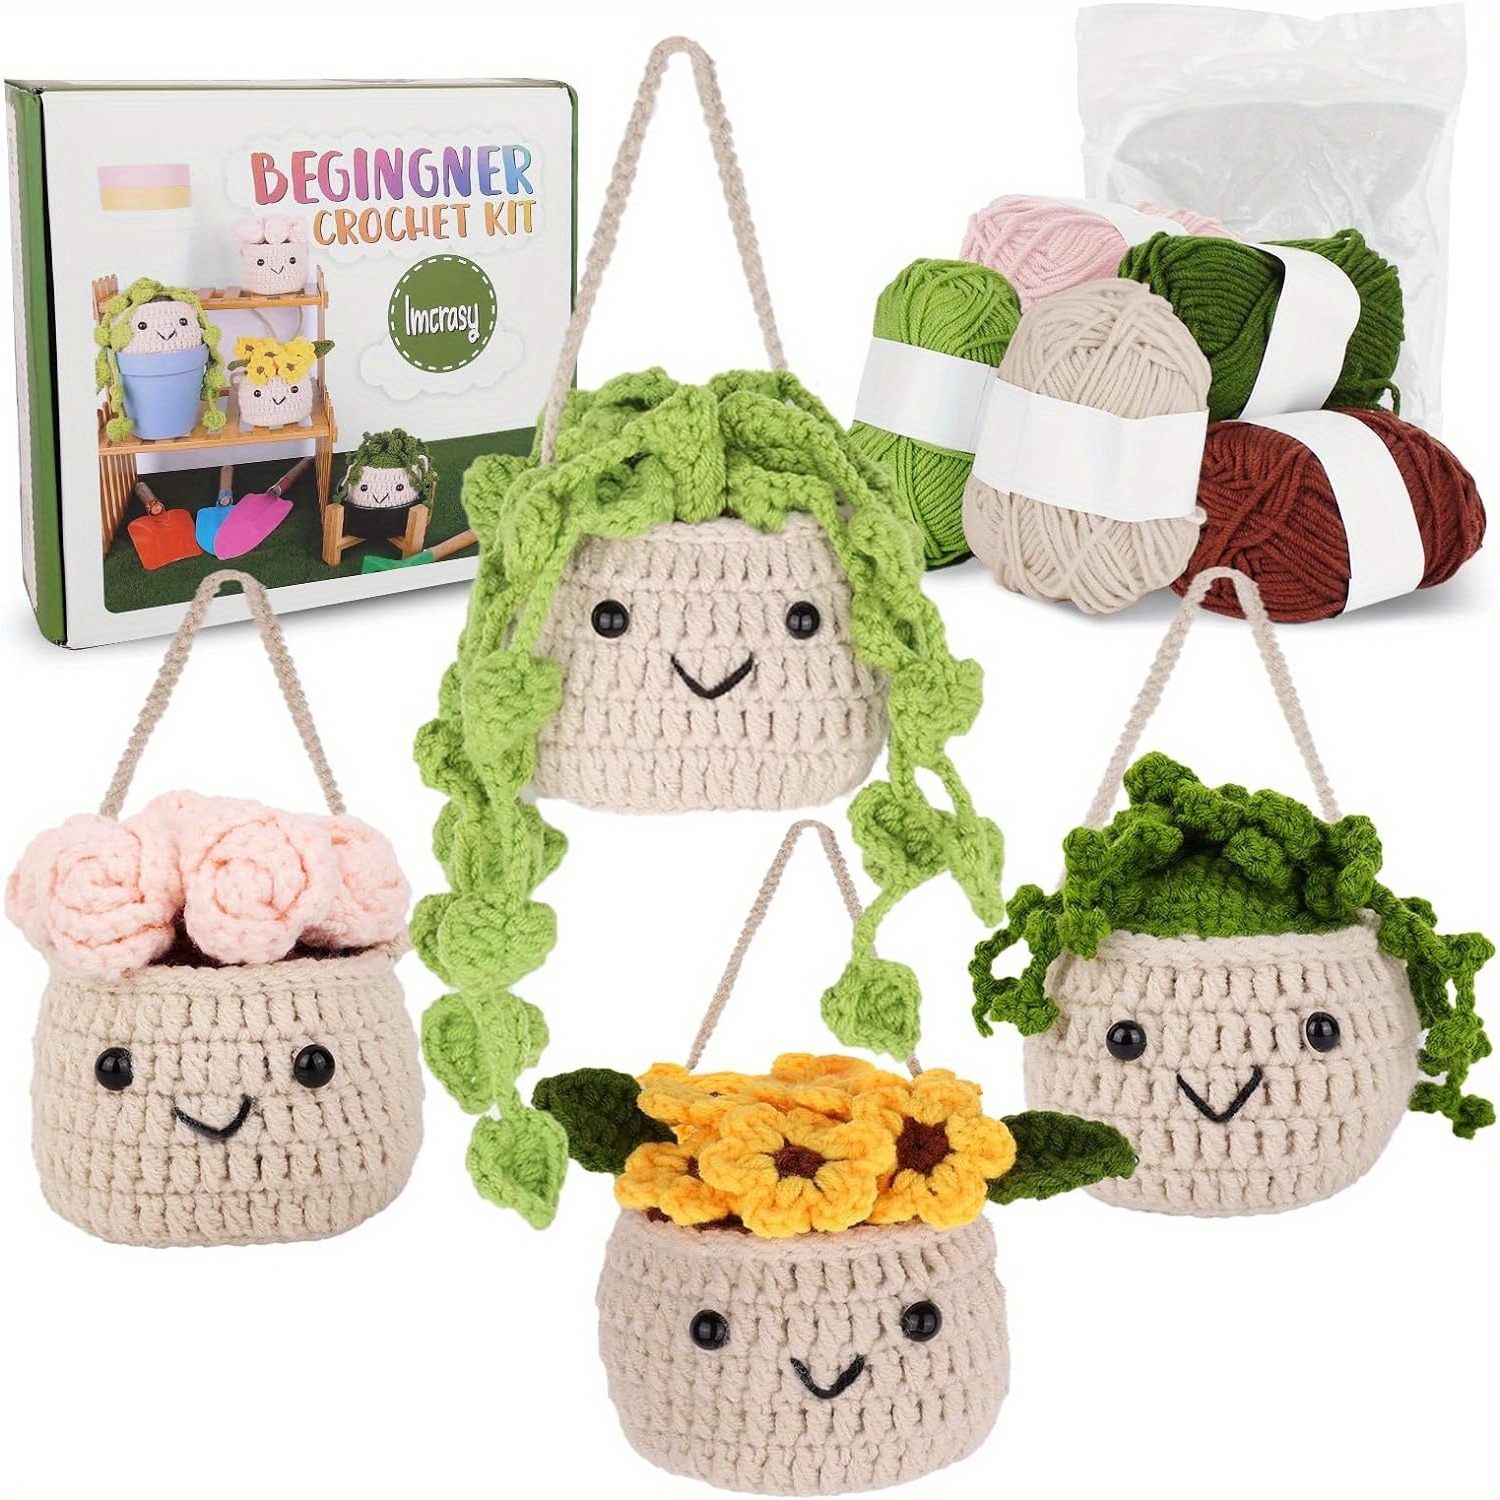 

Crochet Kit | Crochet Kit For Beginners | Beginner Crochet & Knitting Kit With Step By Step Video Lessons | 4 Pc Cute Potted Plants Crochet Kit With Complete Crochet Accessories (40%+ Yarn)